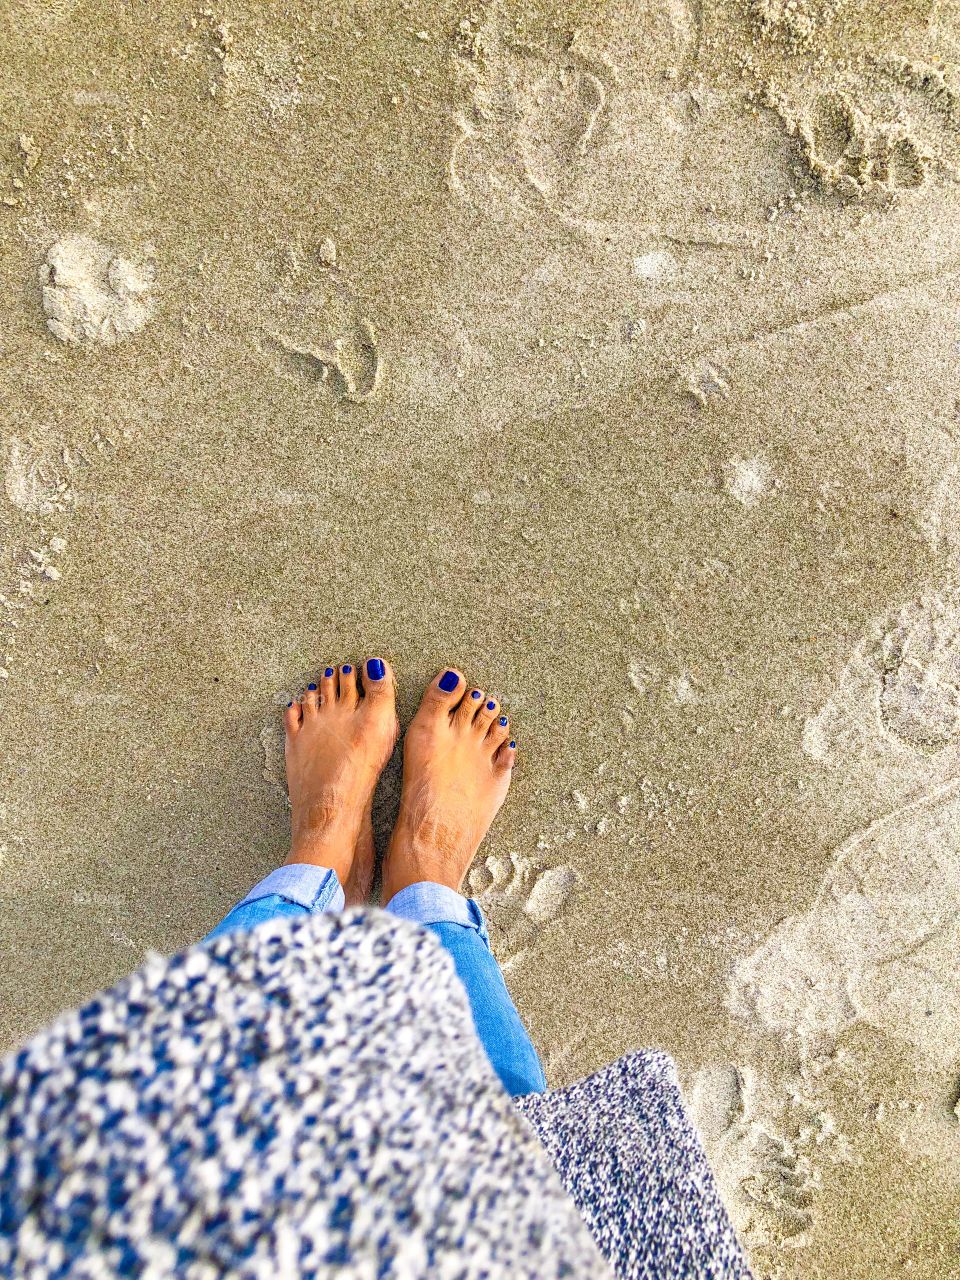 Feet in the sand 